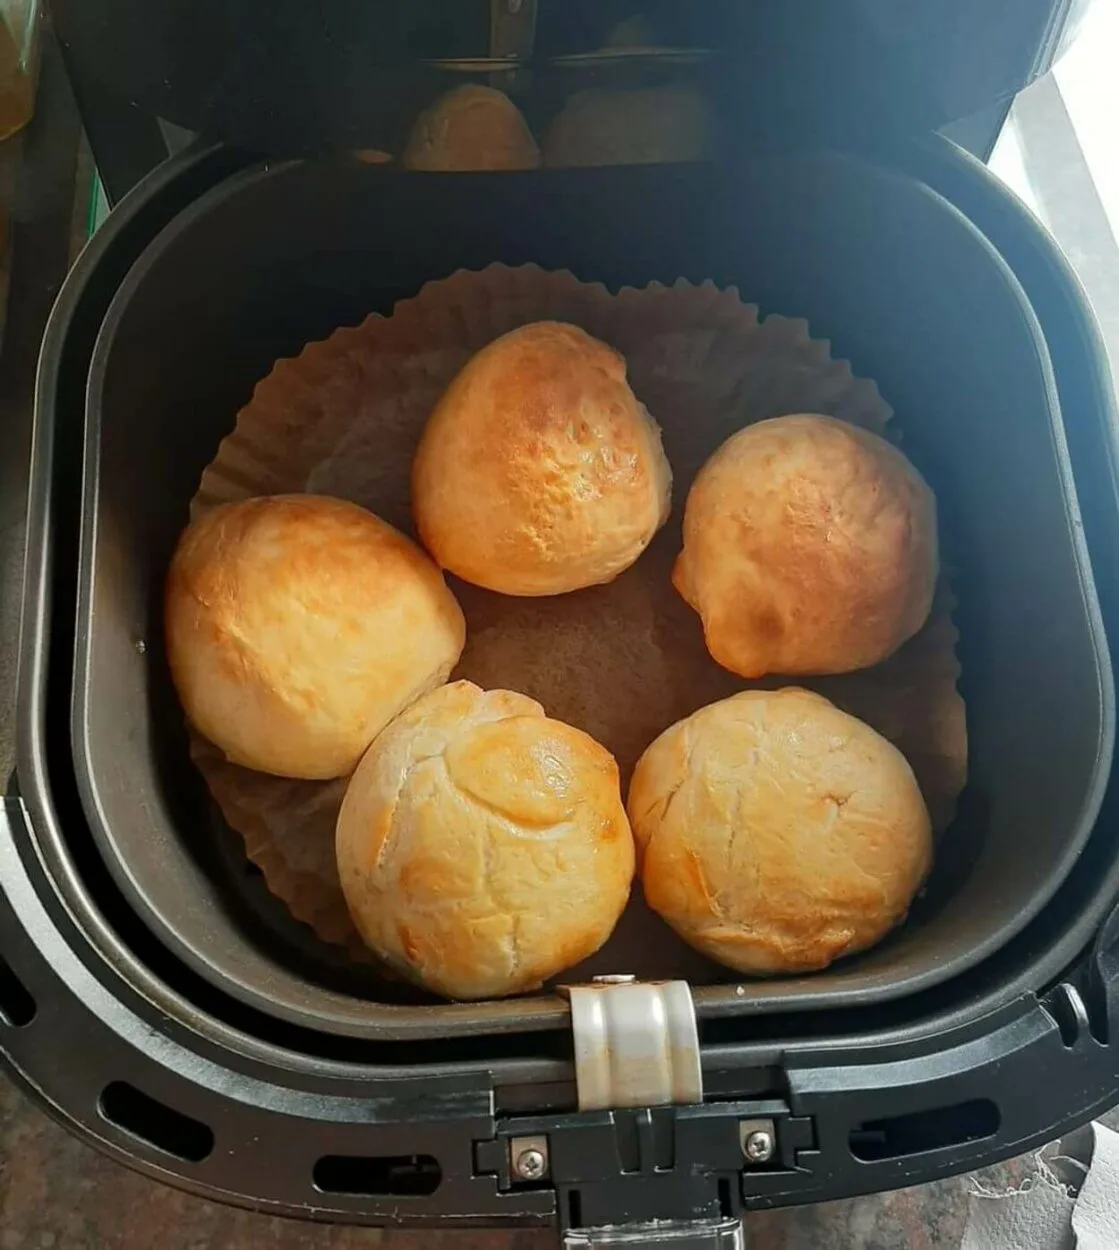 Parchment paper being used in an air fryer